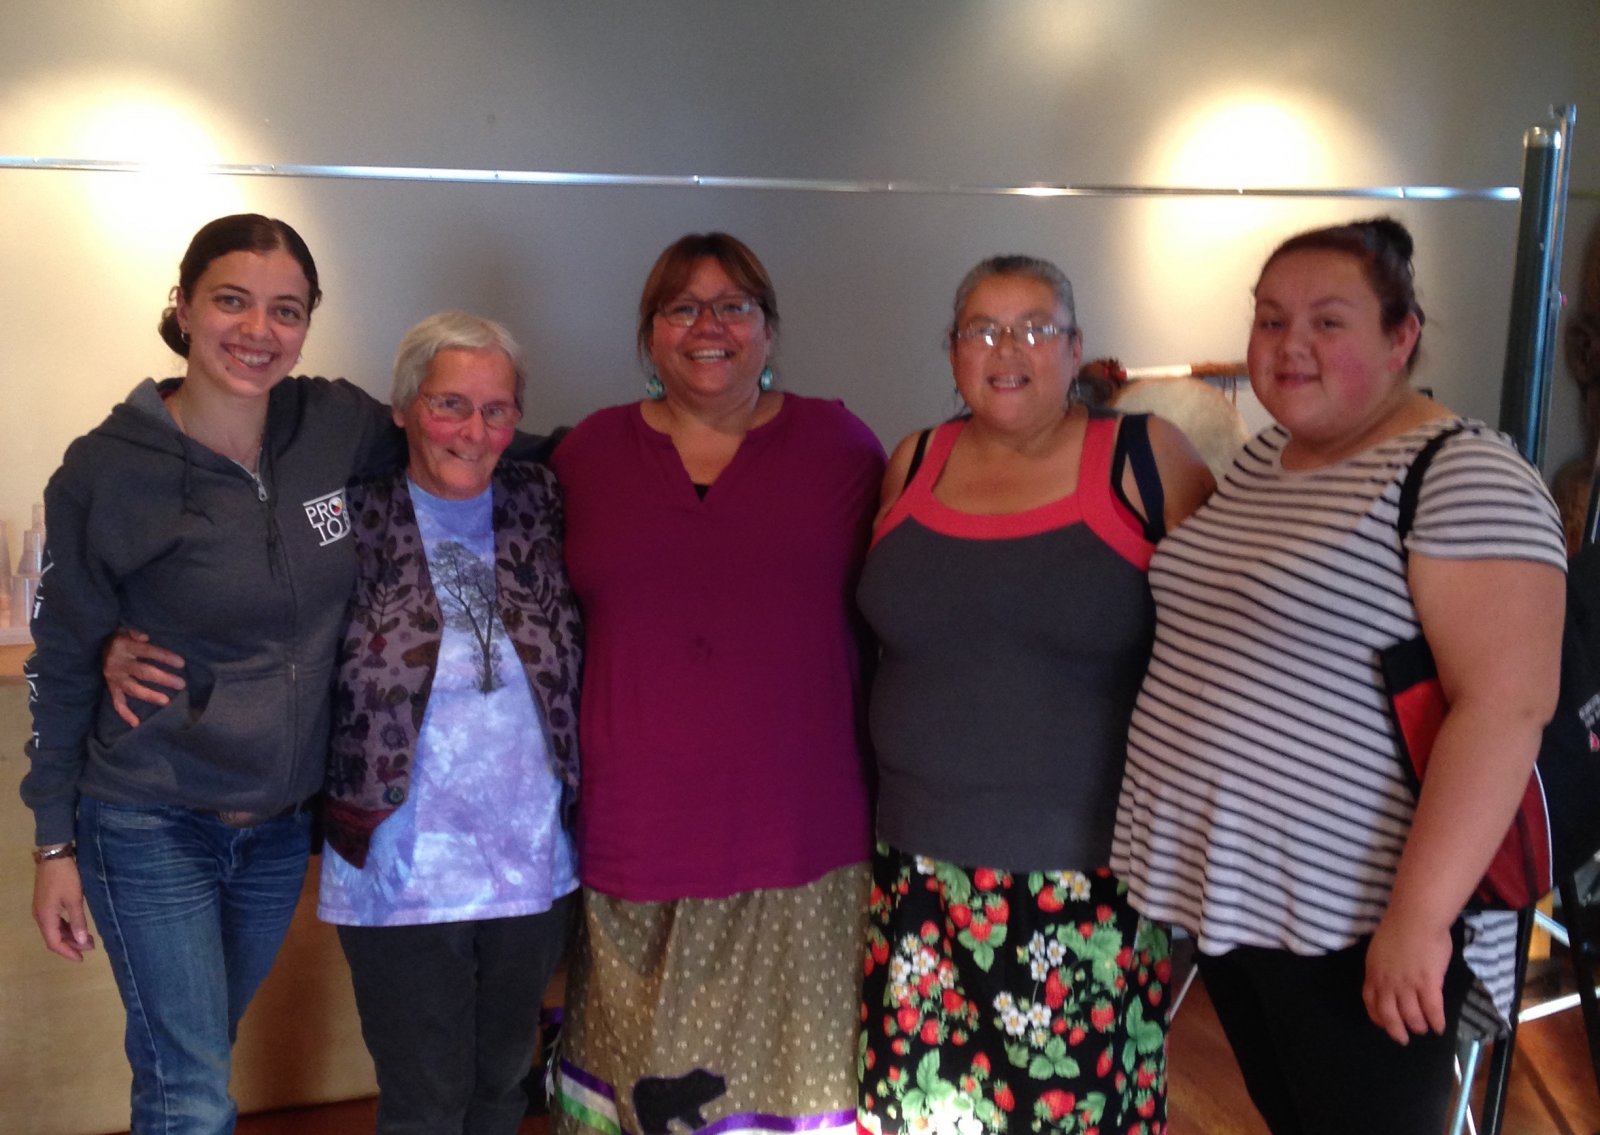 Celebrating this chance to meet with the Michipicoten women along the shores of Lake Superior.